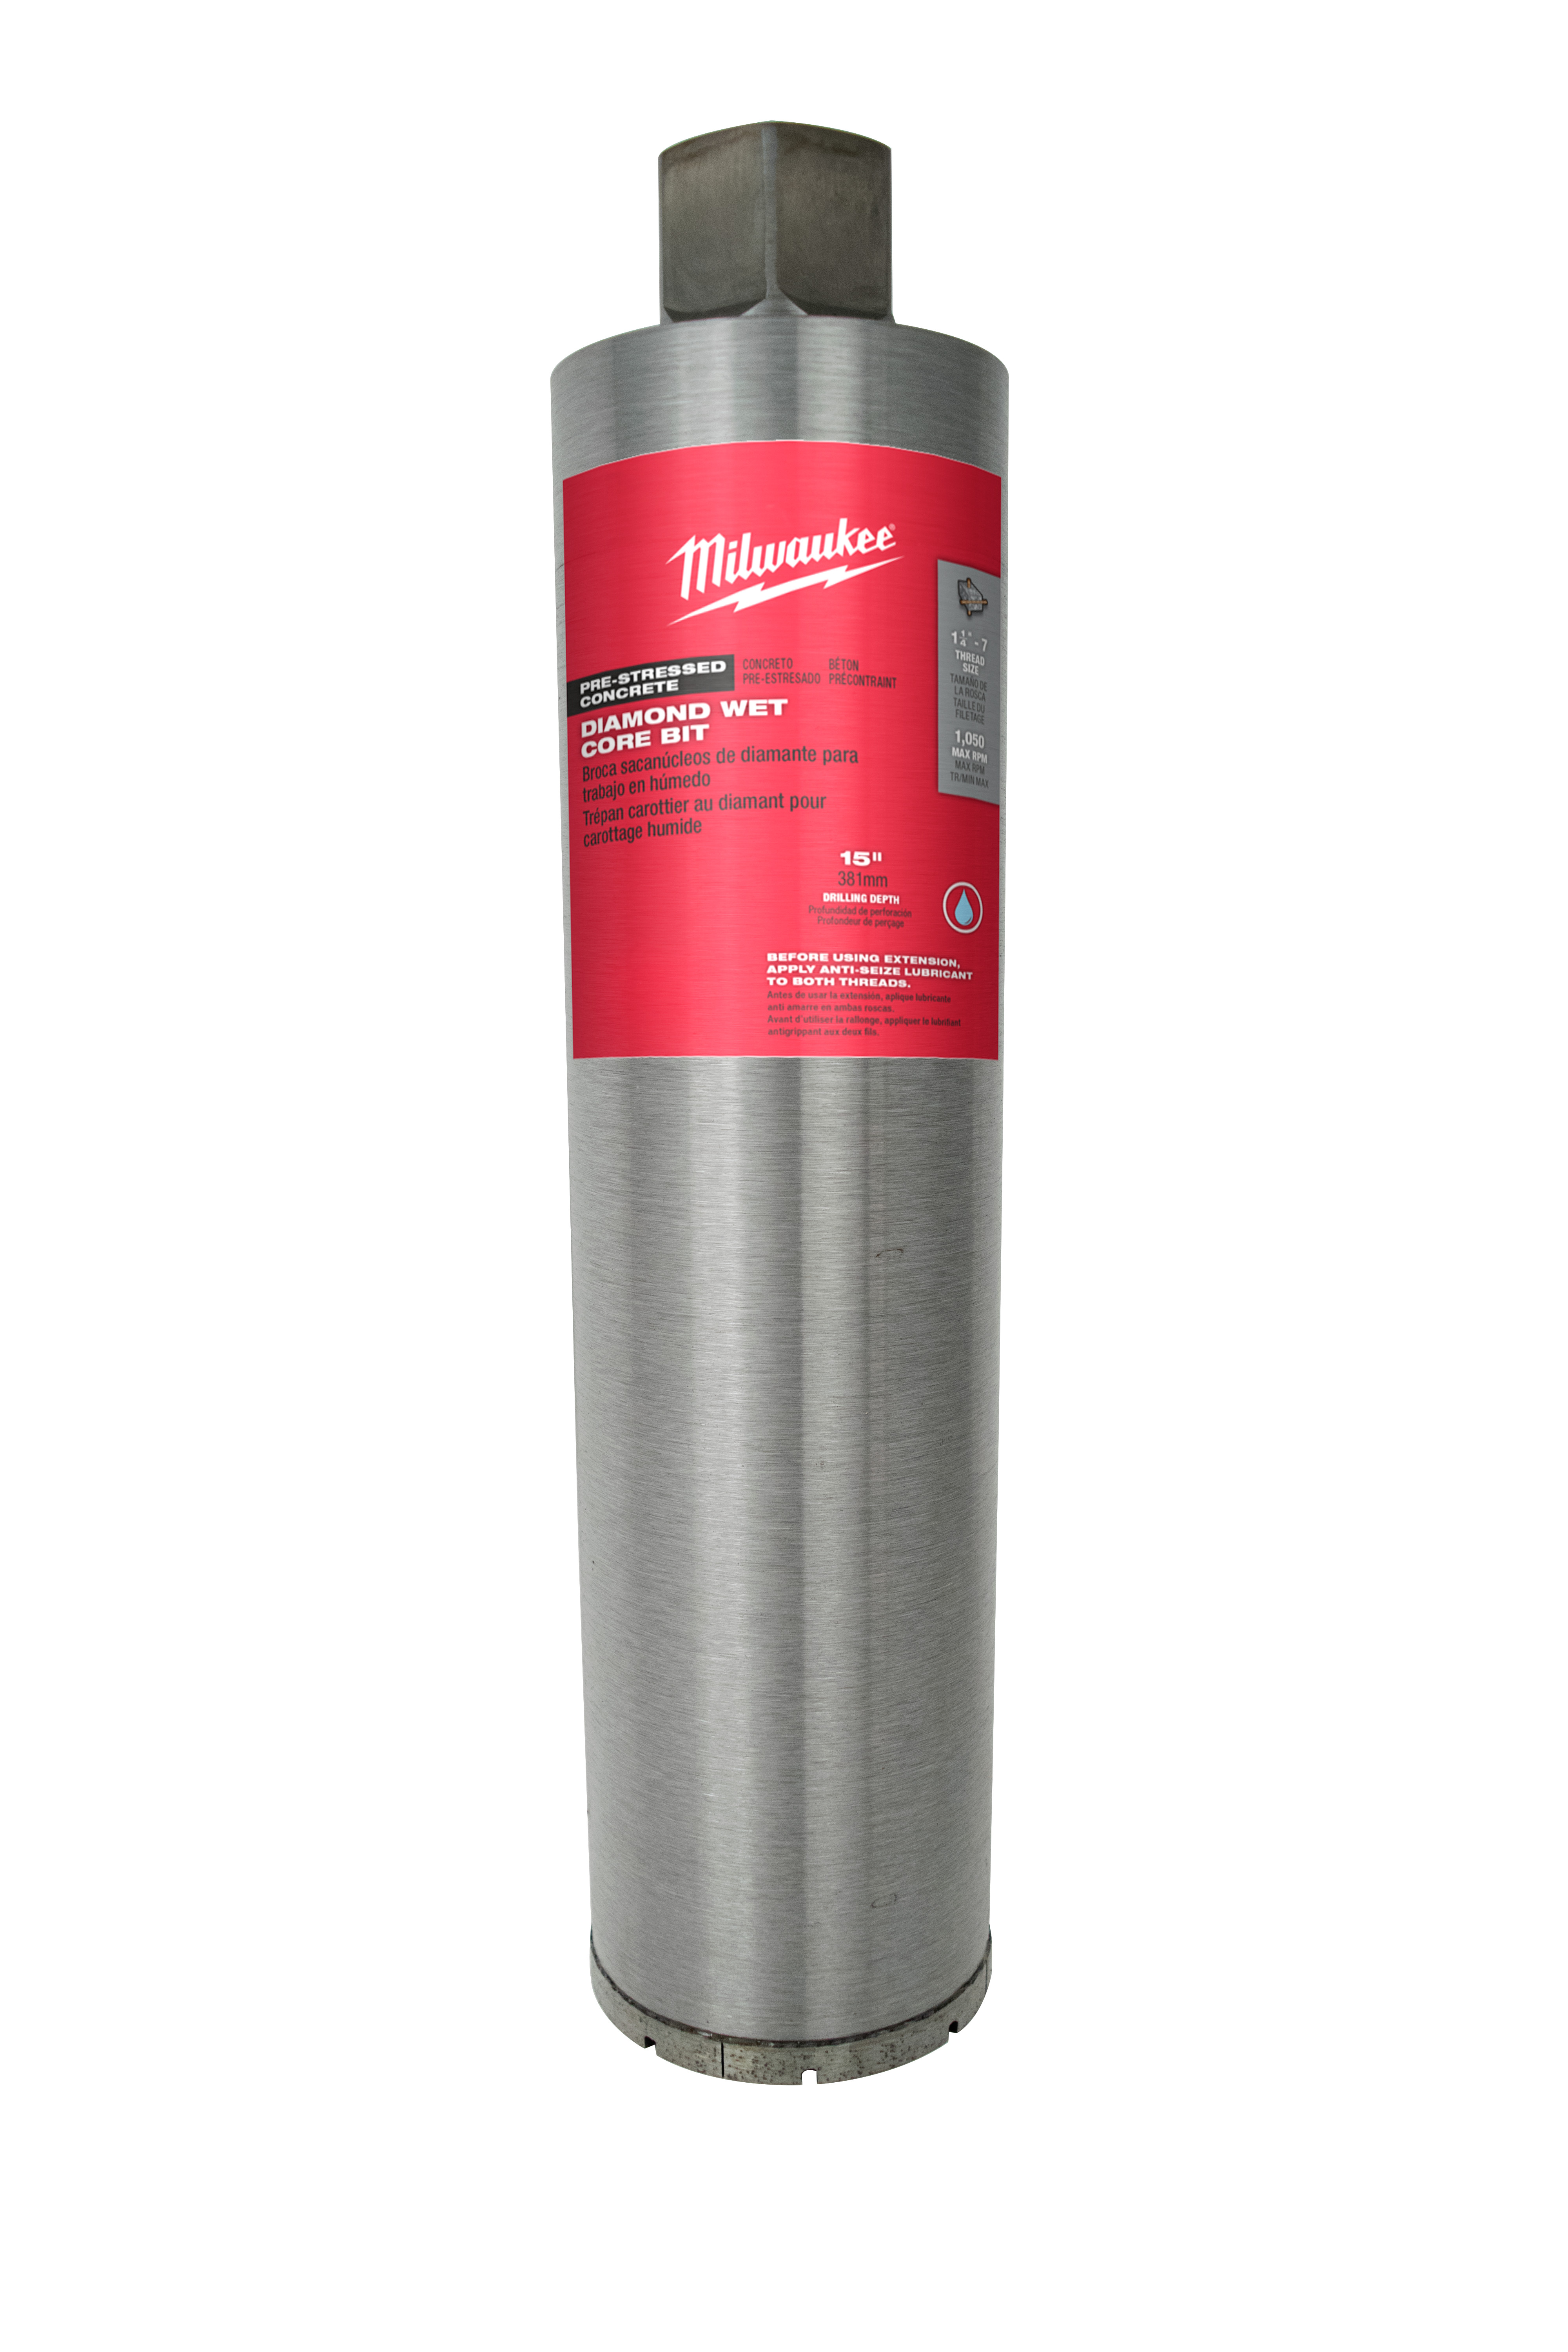 48-17-1010 045242357017 Milwaukee diamond wet core bits are designed to the highest standards, only using quality diamonds. Available in sizes 1 in. to 6 in., Milwaukee pre-stressed wet core bits are designed specifically for the extra demands of drilling pre-stressed concrete. The cutting segments feature small gaps, preventing the bit from snagging on pre-tensioned cables or wire mesh. This bits is 15 in. in length and contains a 5/8 in. 11 thread.